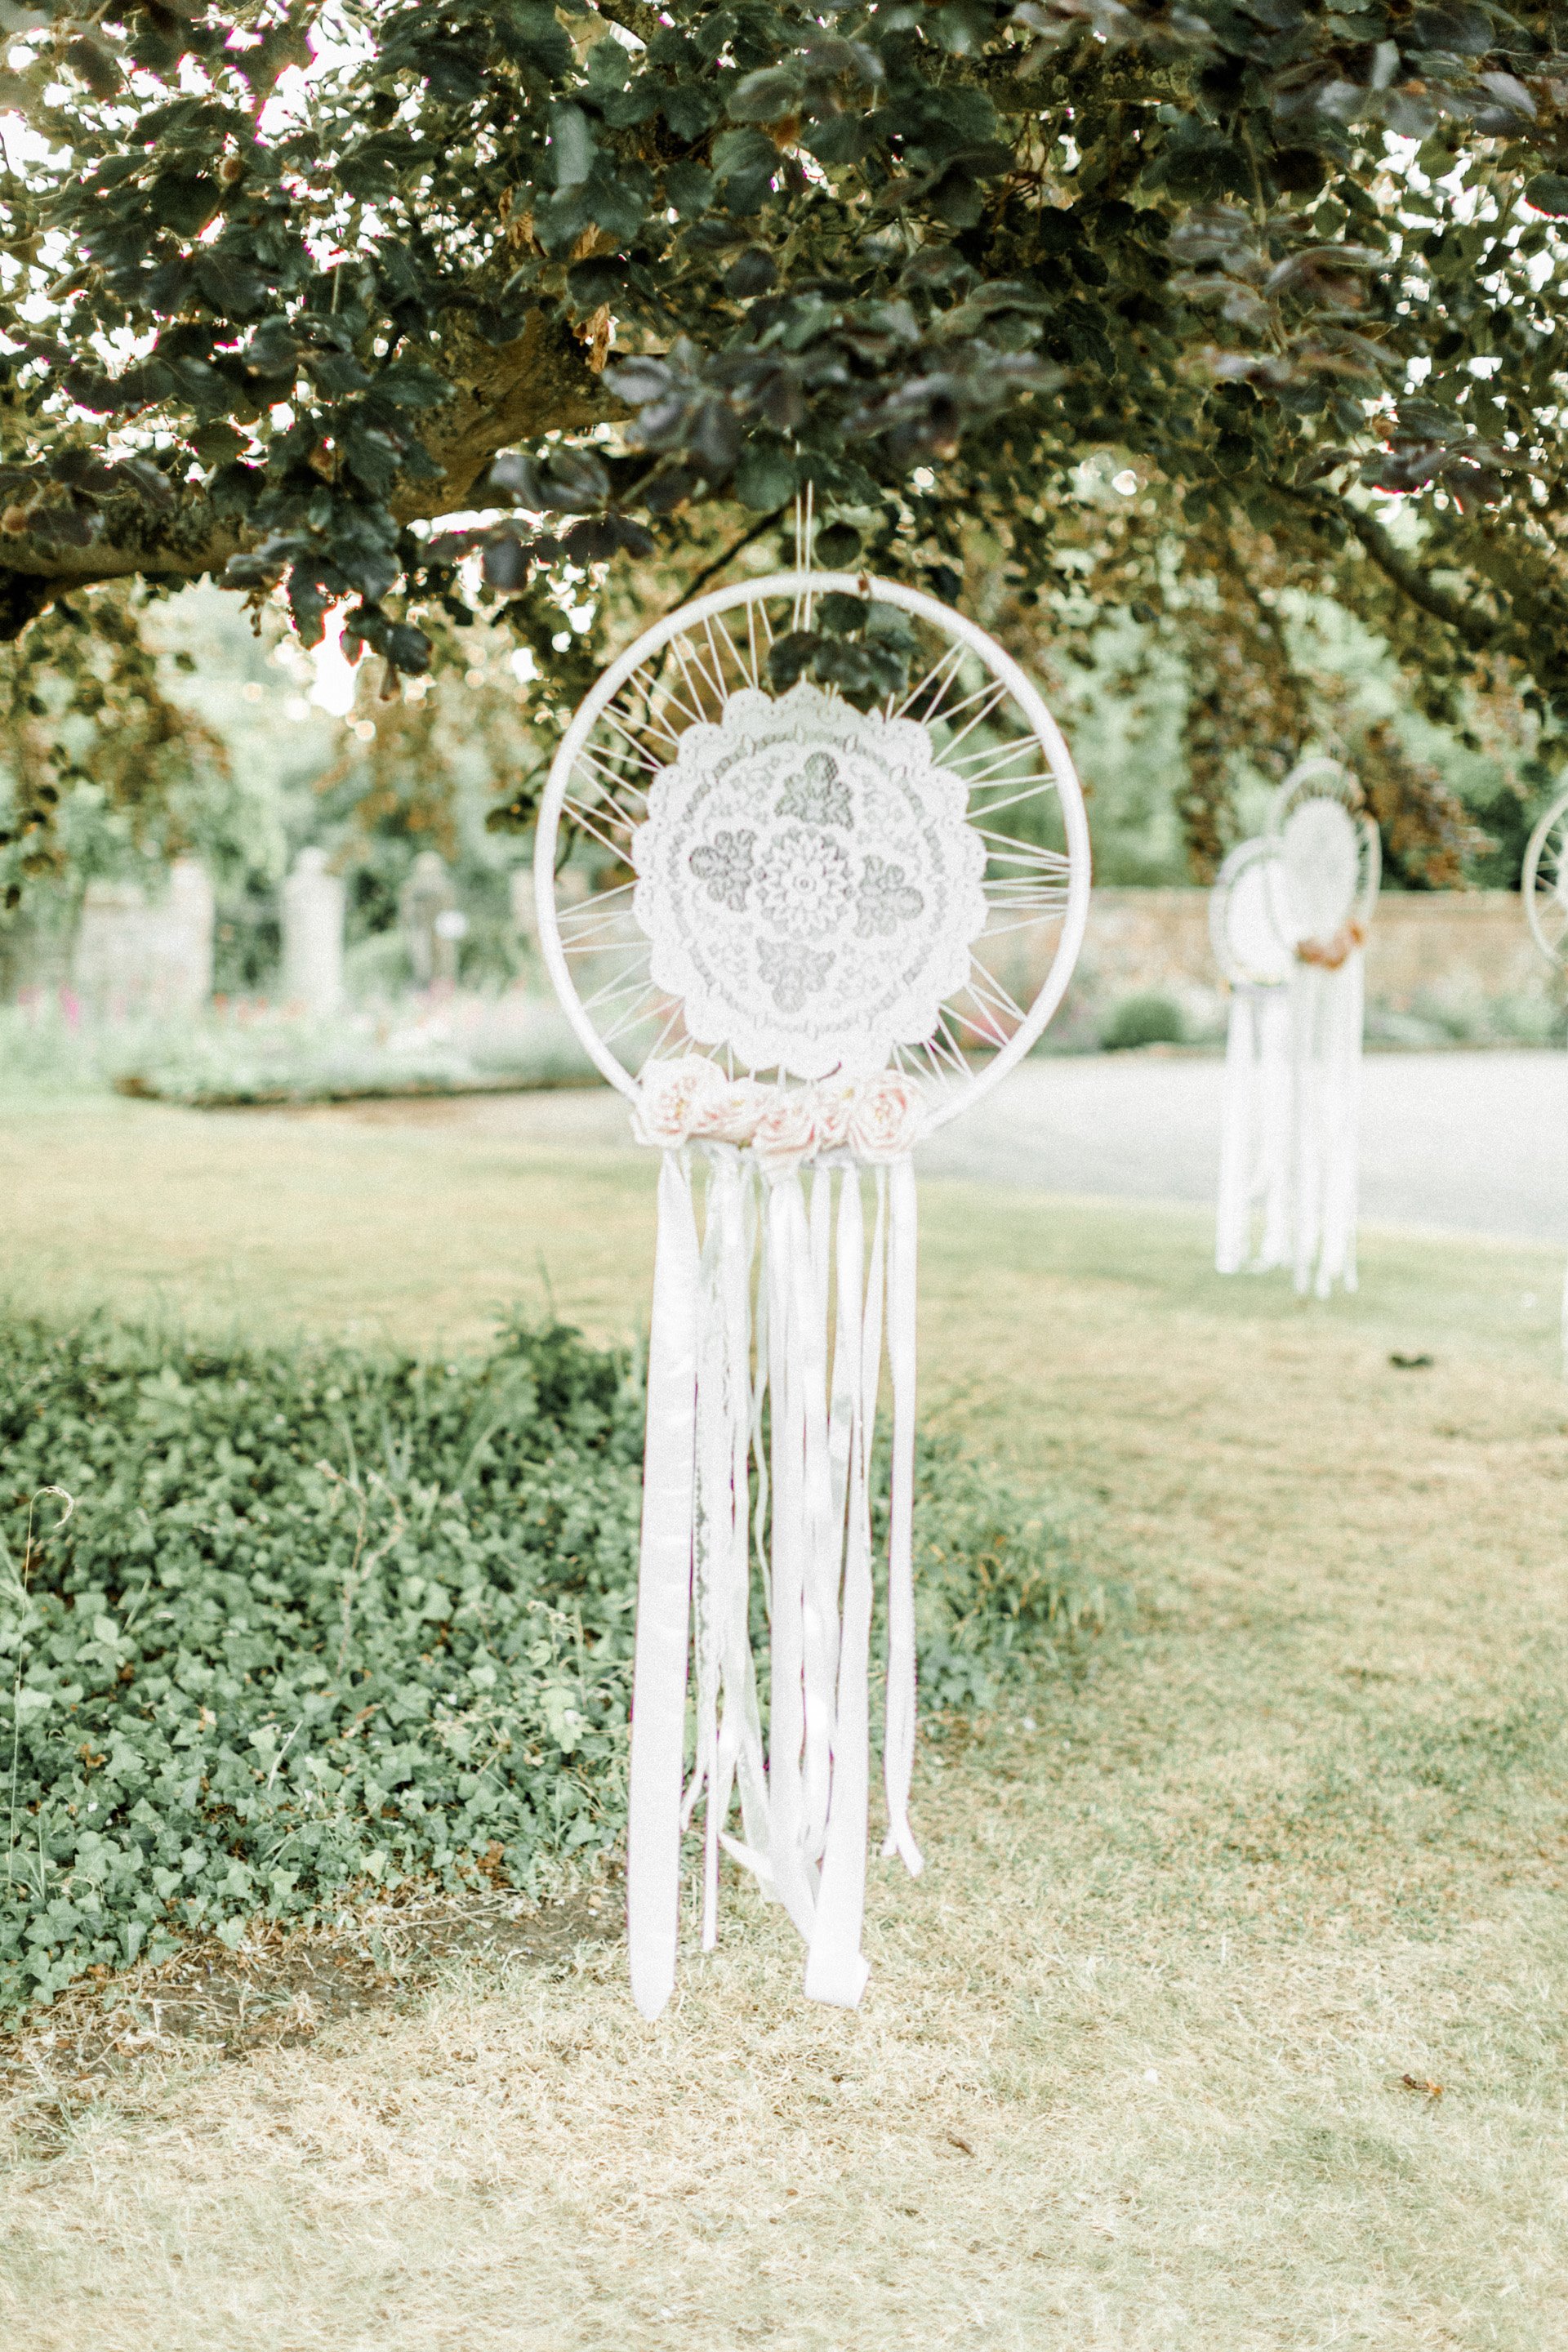 Festival wedding inspiration dreamcatchers hung in trees 2021 and 22